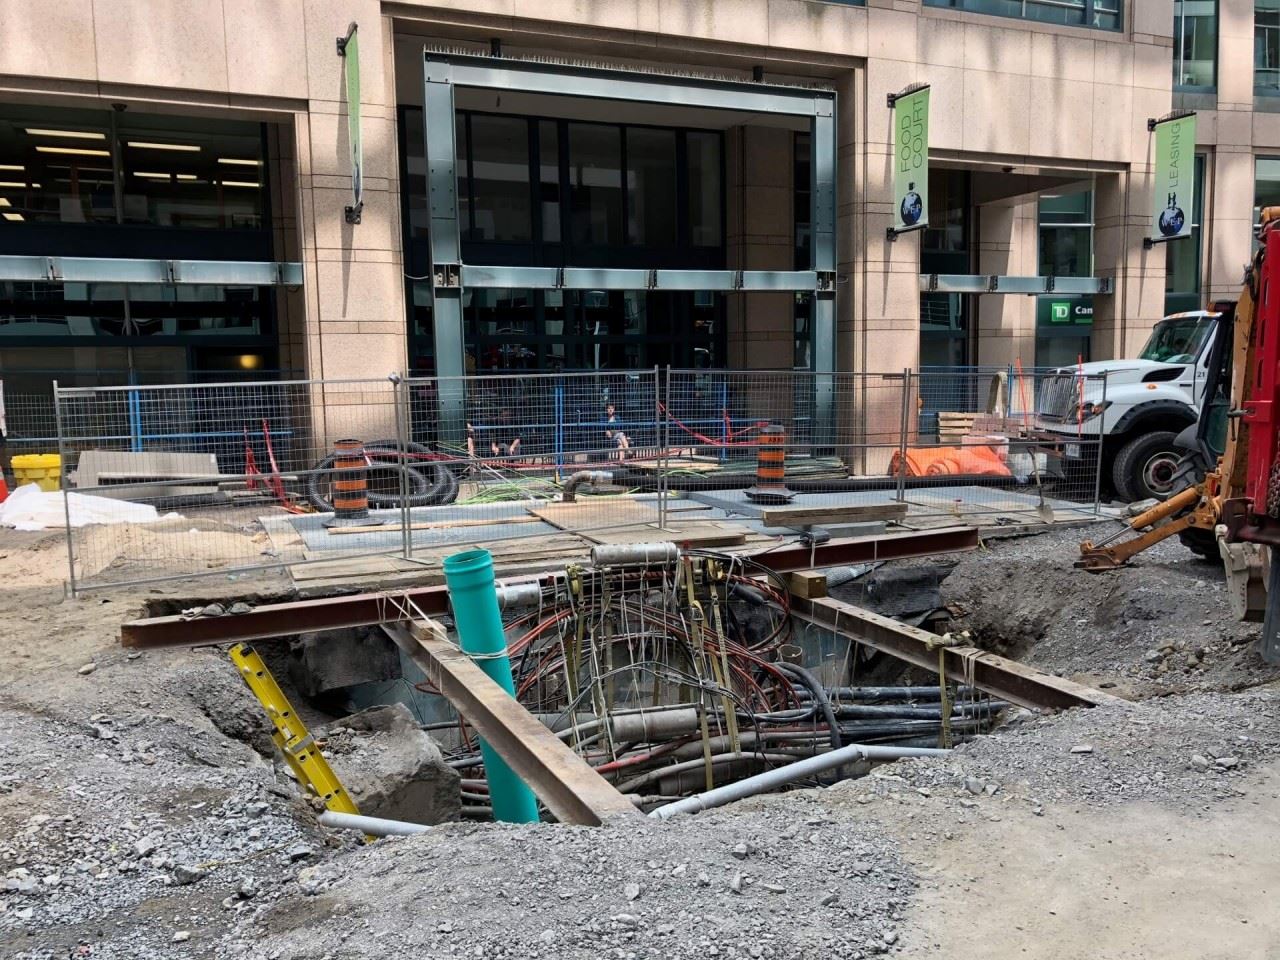 Open work hole on Queen Street, showing exposed wires, conduits and connections.